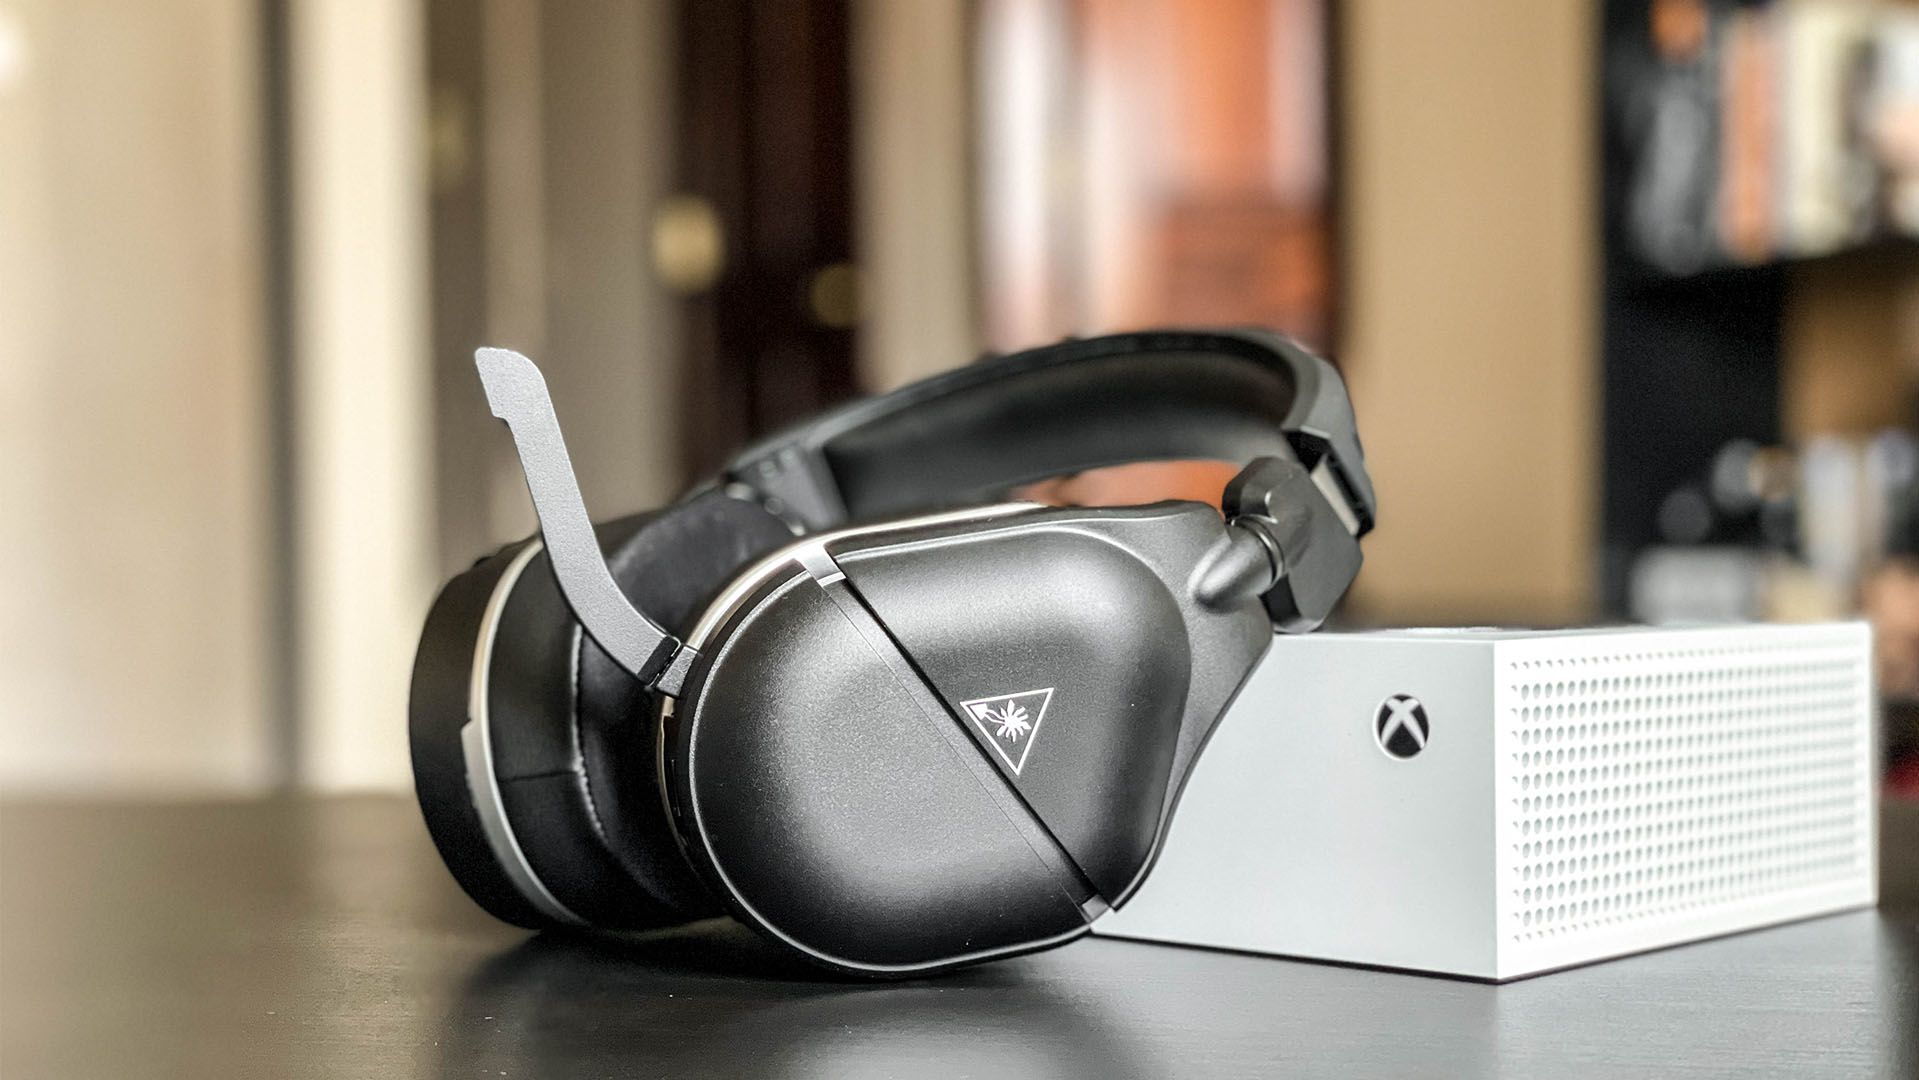 Bluetooth Gaming Headsets - Best Buy